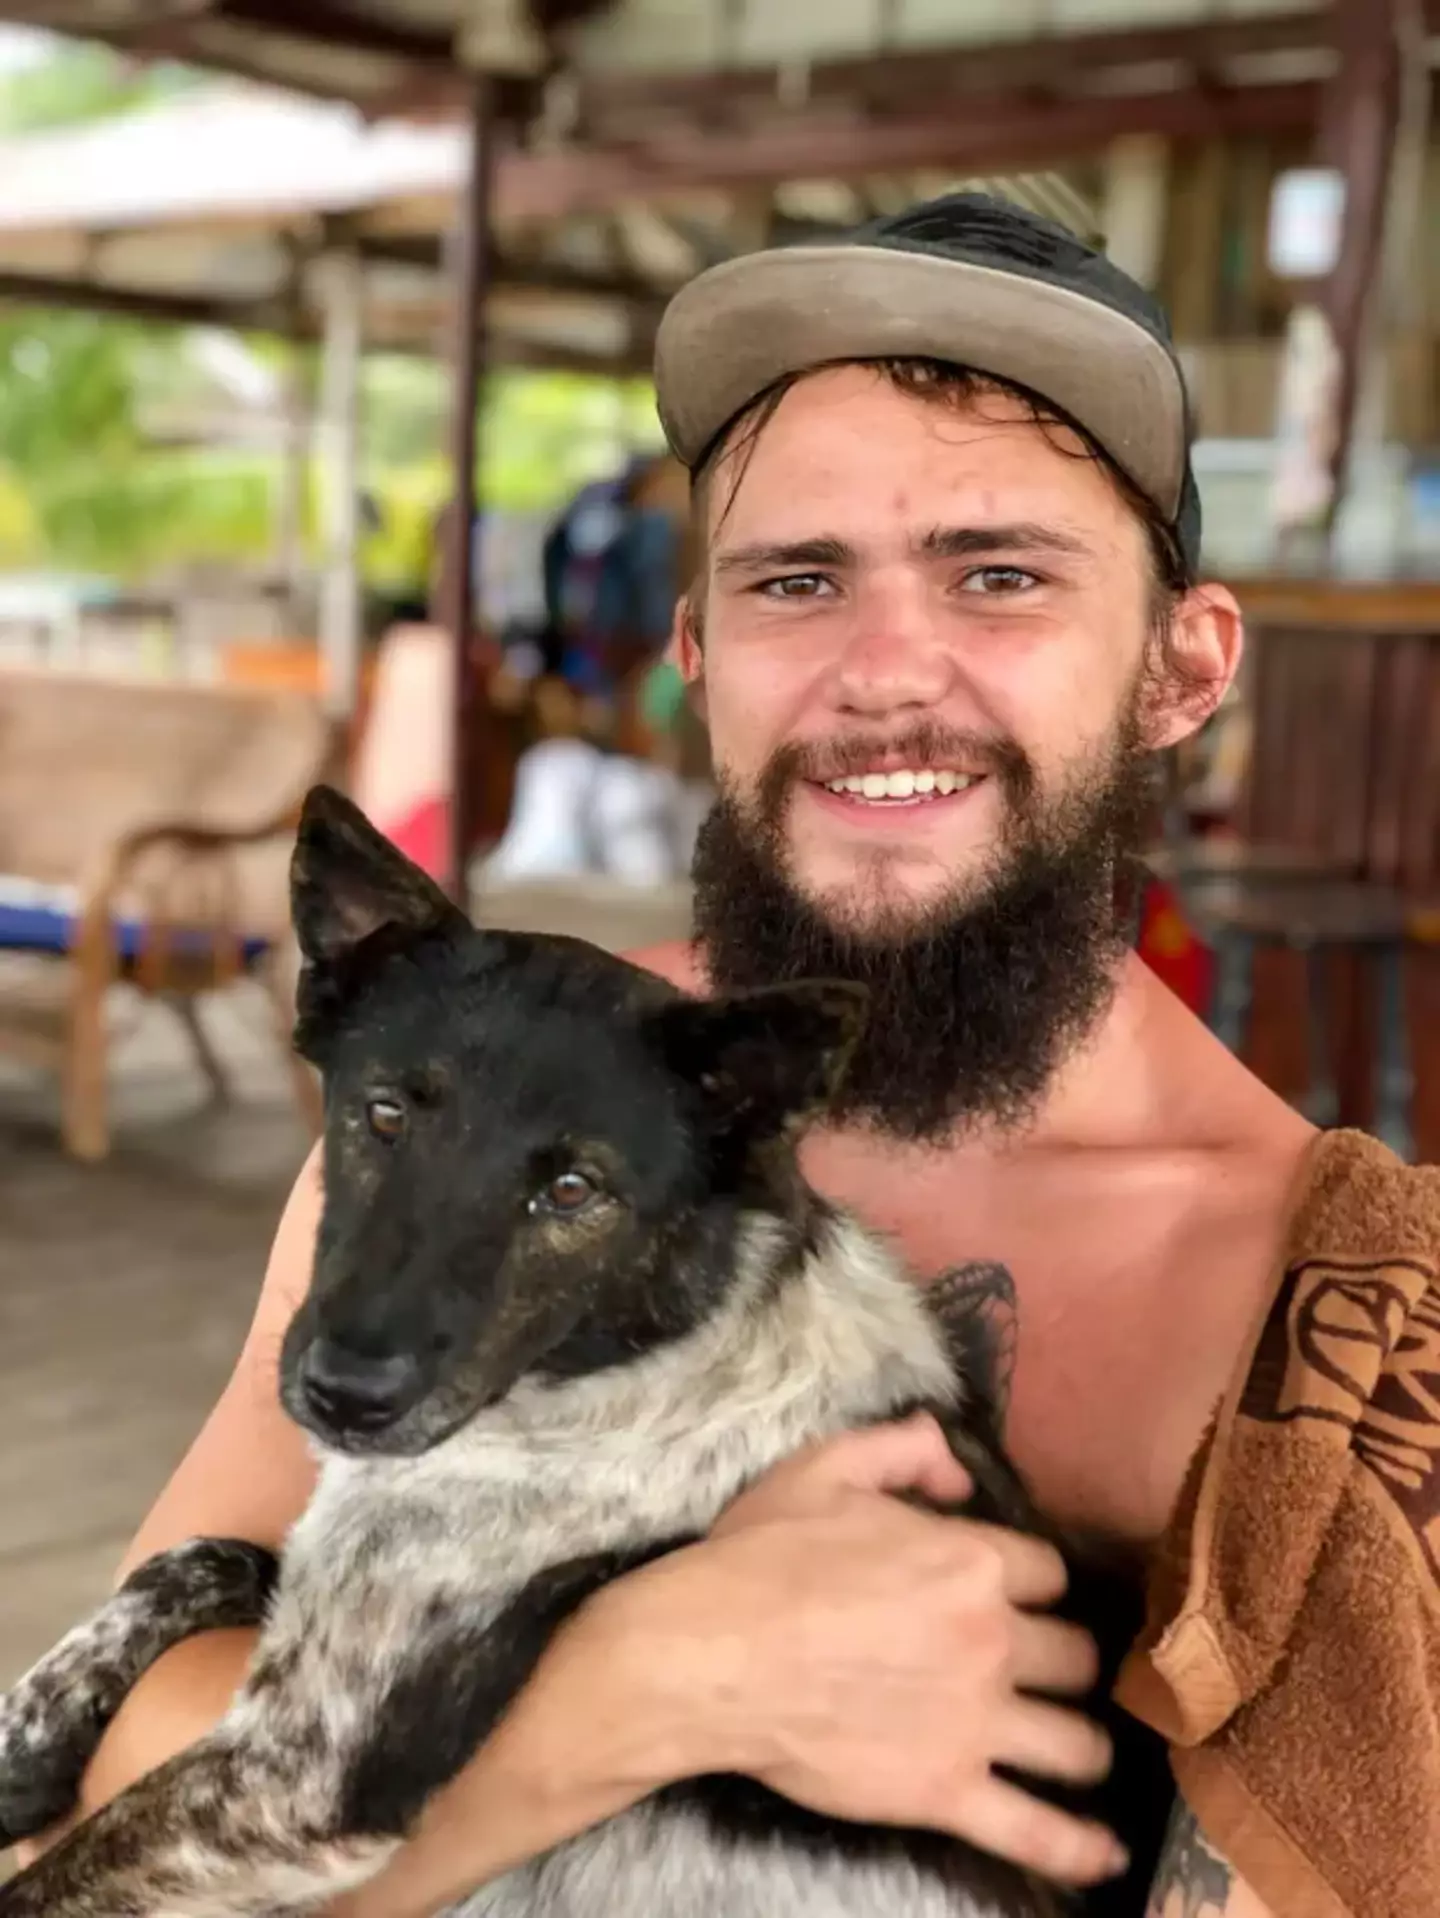 Ben Wilkins, from Chinley, Derbyshire, was just two weeks into his trip to Koh Rong when he fell sick. (ViralPress)